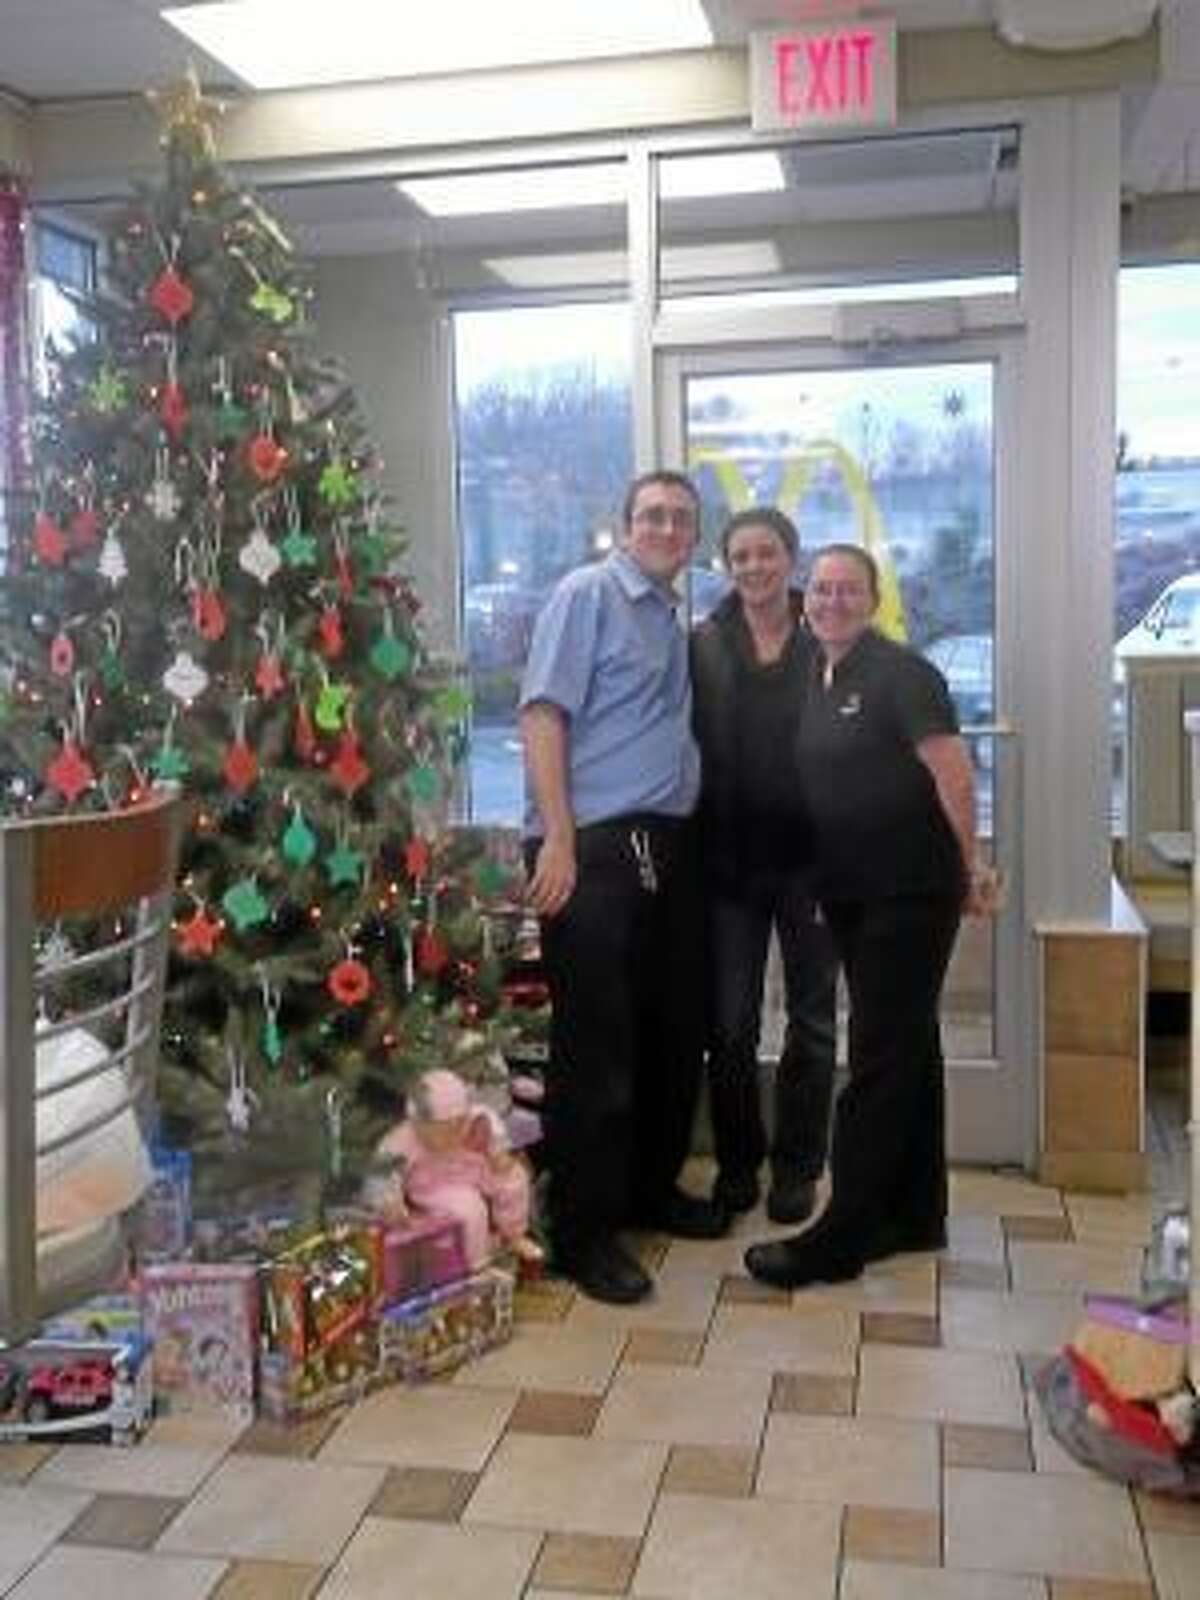 NIKKI TRELEAVEN/The Register Citizen East Main Street McDonald's in Torrington raised more than $3,000 to buy more than 300 toys that will be distributed to four local charities: Susan B. Anthony Project, Torrington Chapter of FISH, Torrington Fire Department and the State Police Department Toy's for Tots drive. Department Manager Robbi Licina and McDonald's employee Mary Mastrobuono with state Police Officers Greg Zordan, left, and Mike Burke.